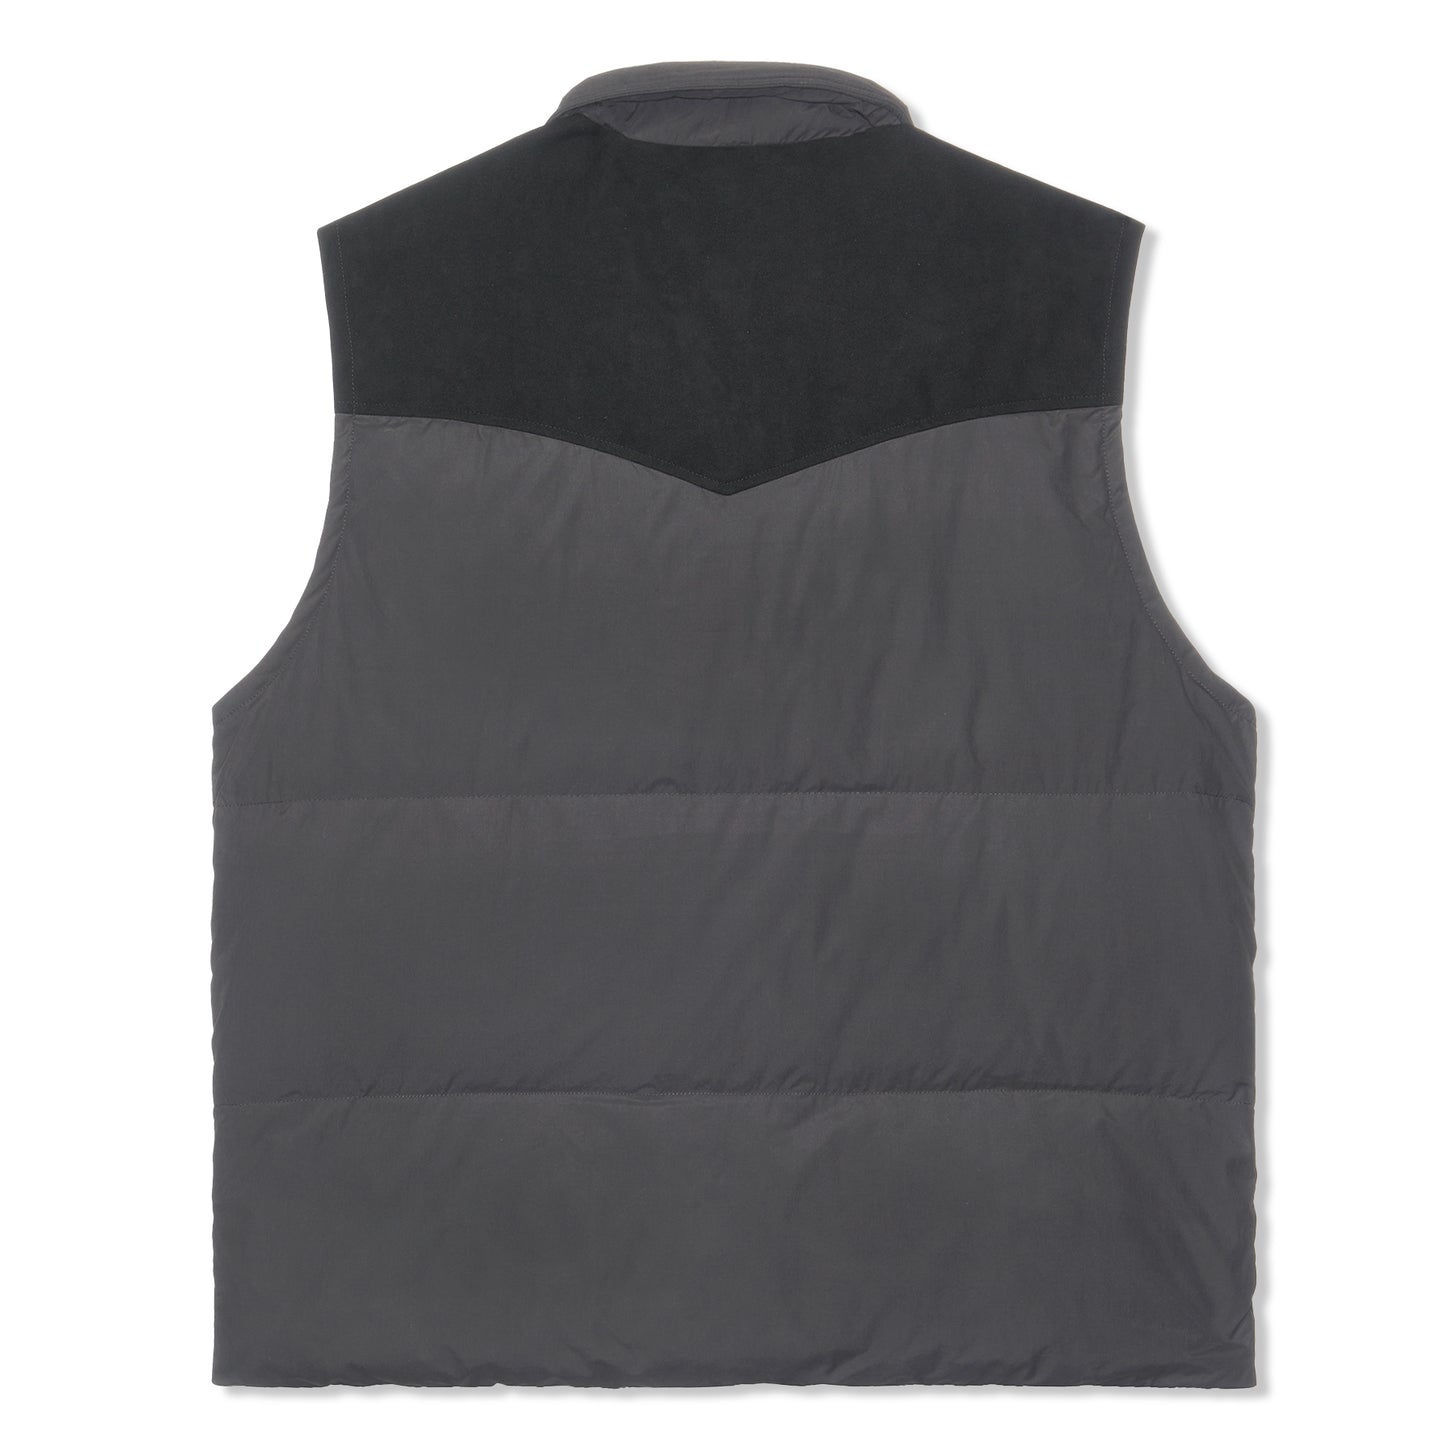 ONE OF THESE DAYS x Woolrich Puffer Vest (Black)